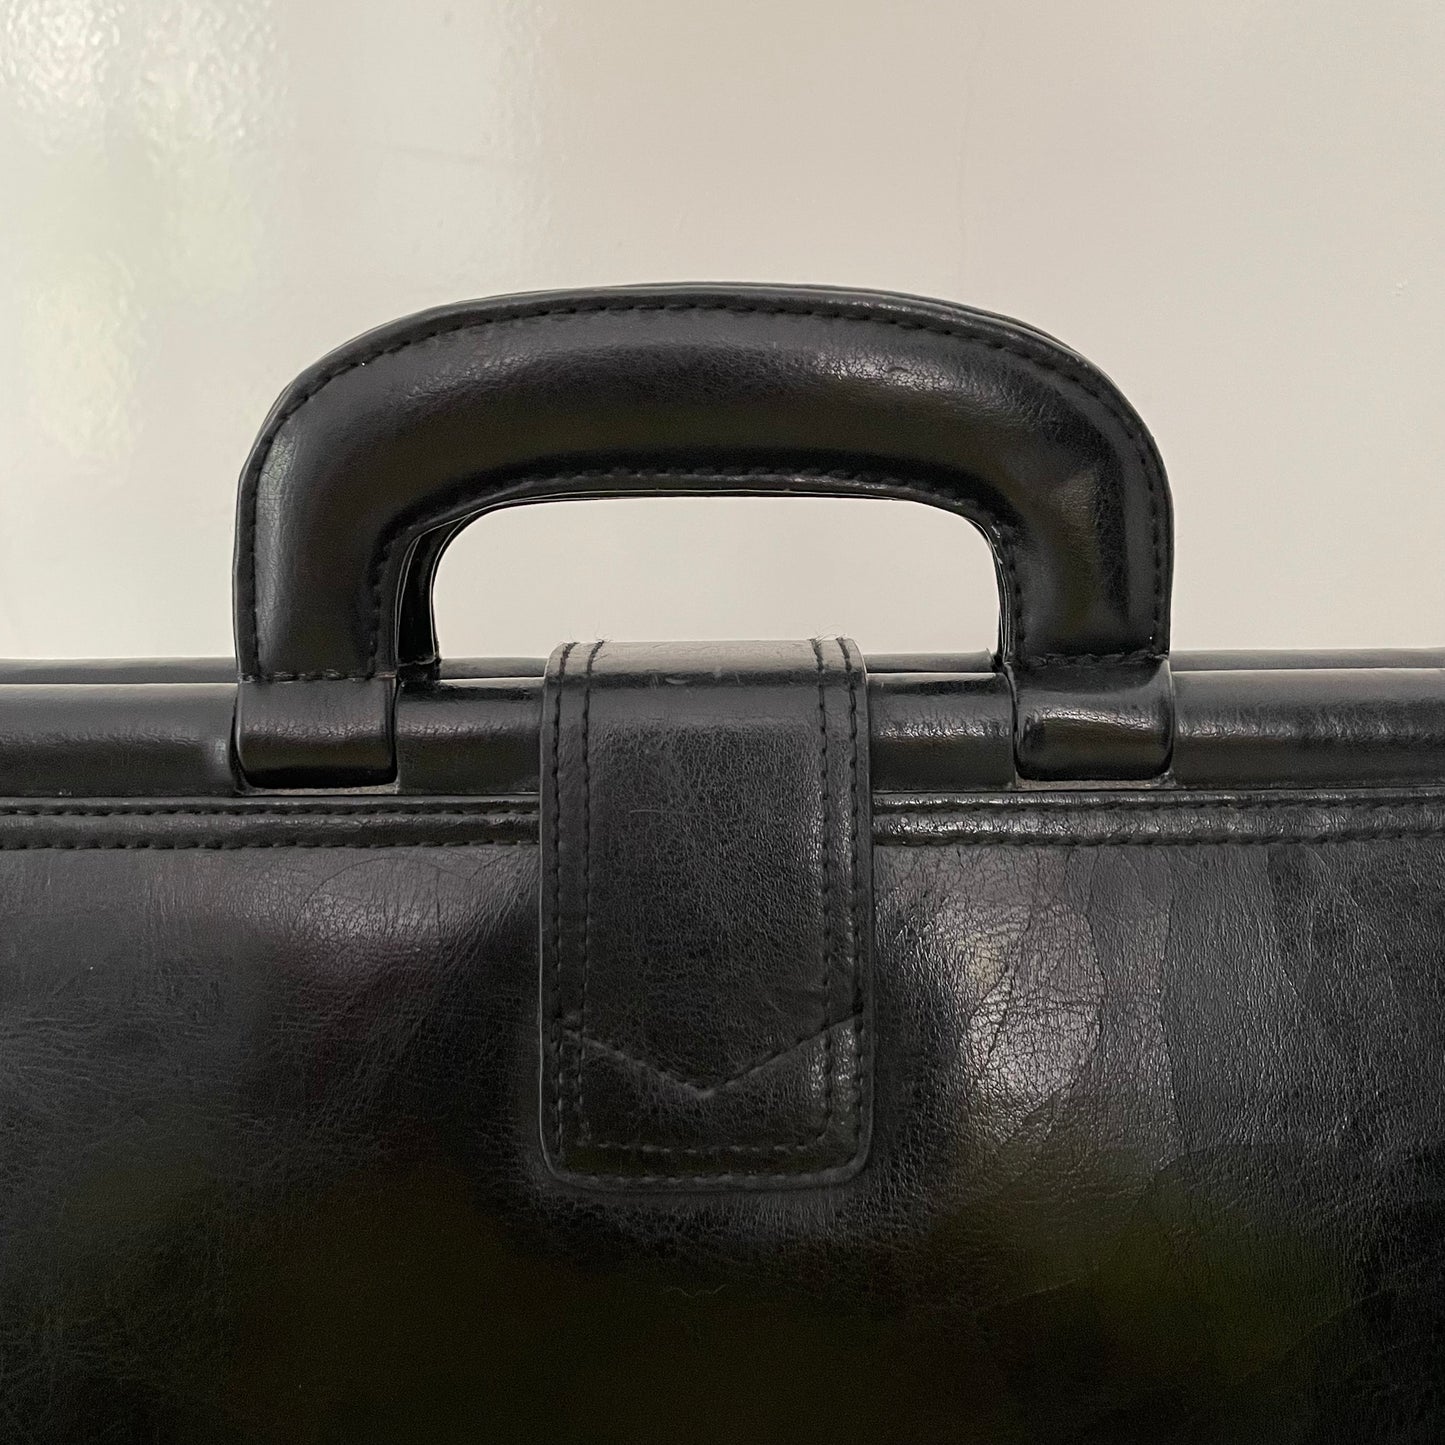 Vintage 1980s signed Lanza Black Leather bag with push lock button